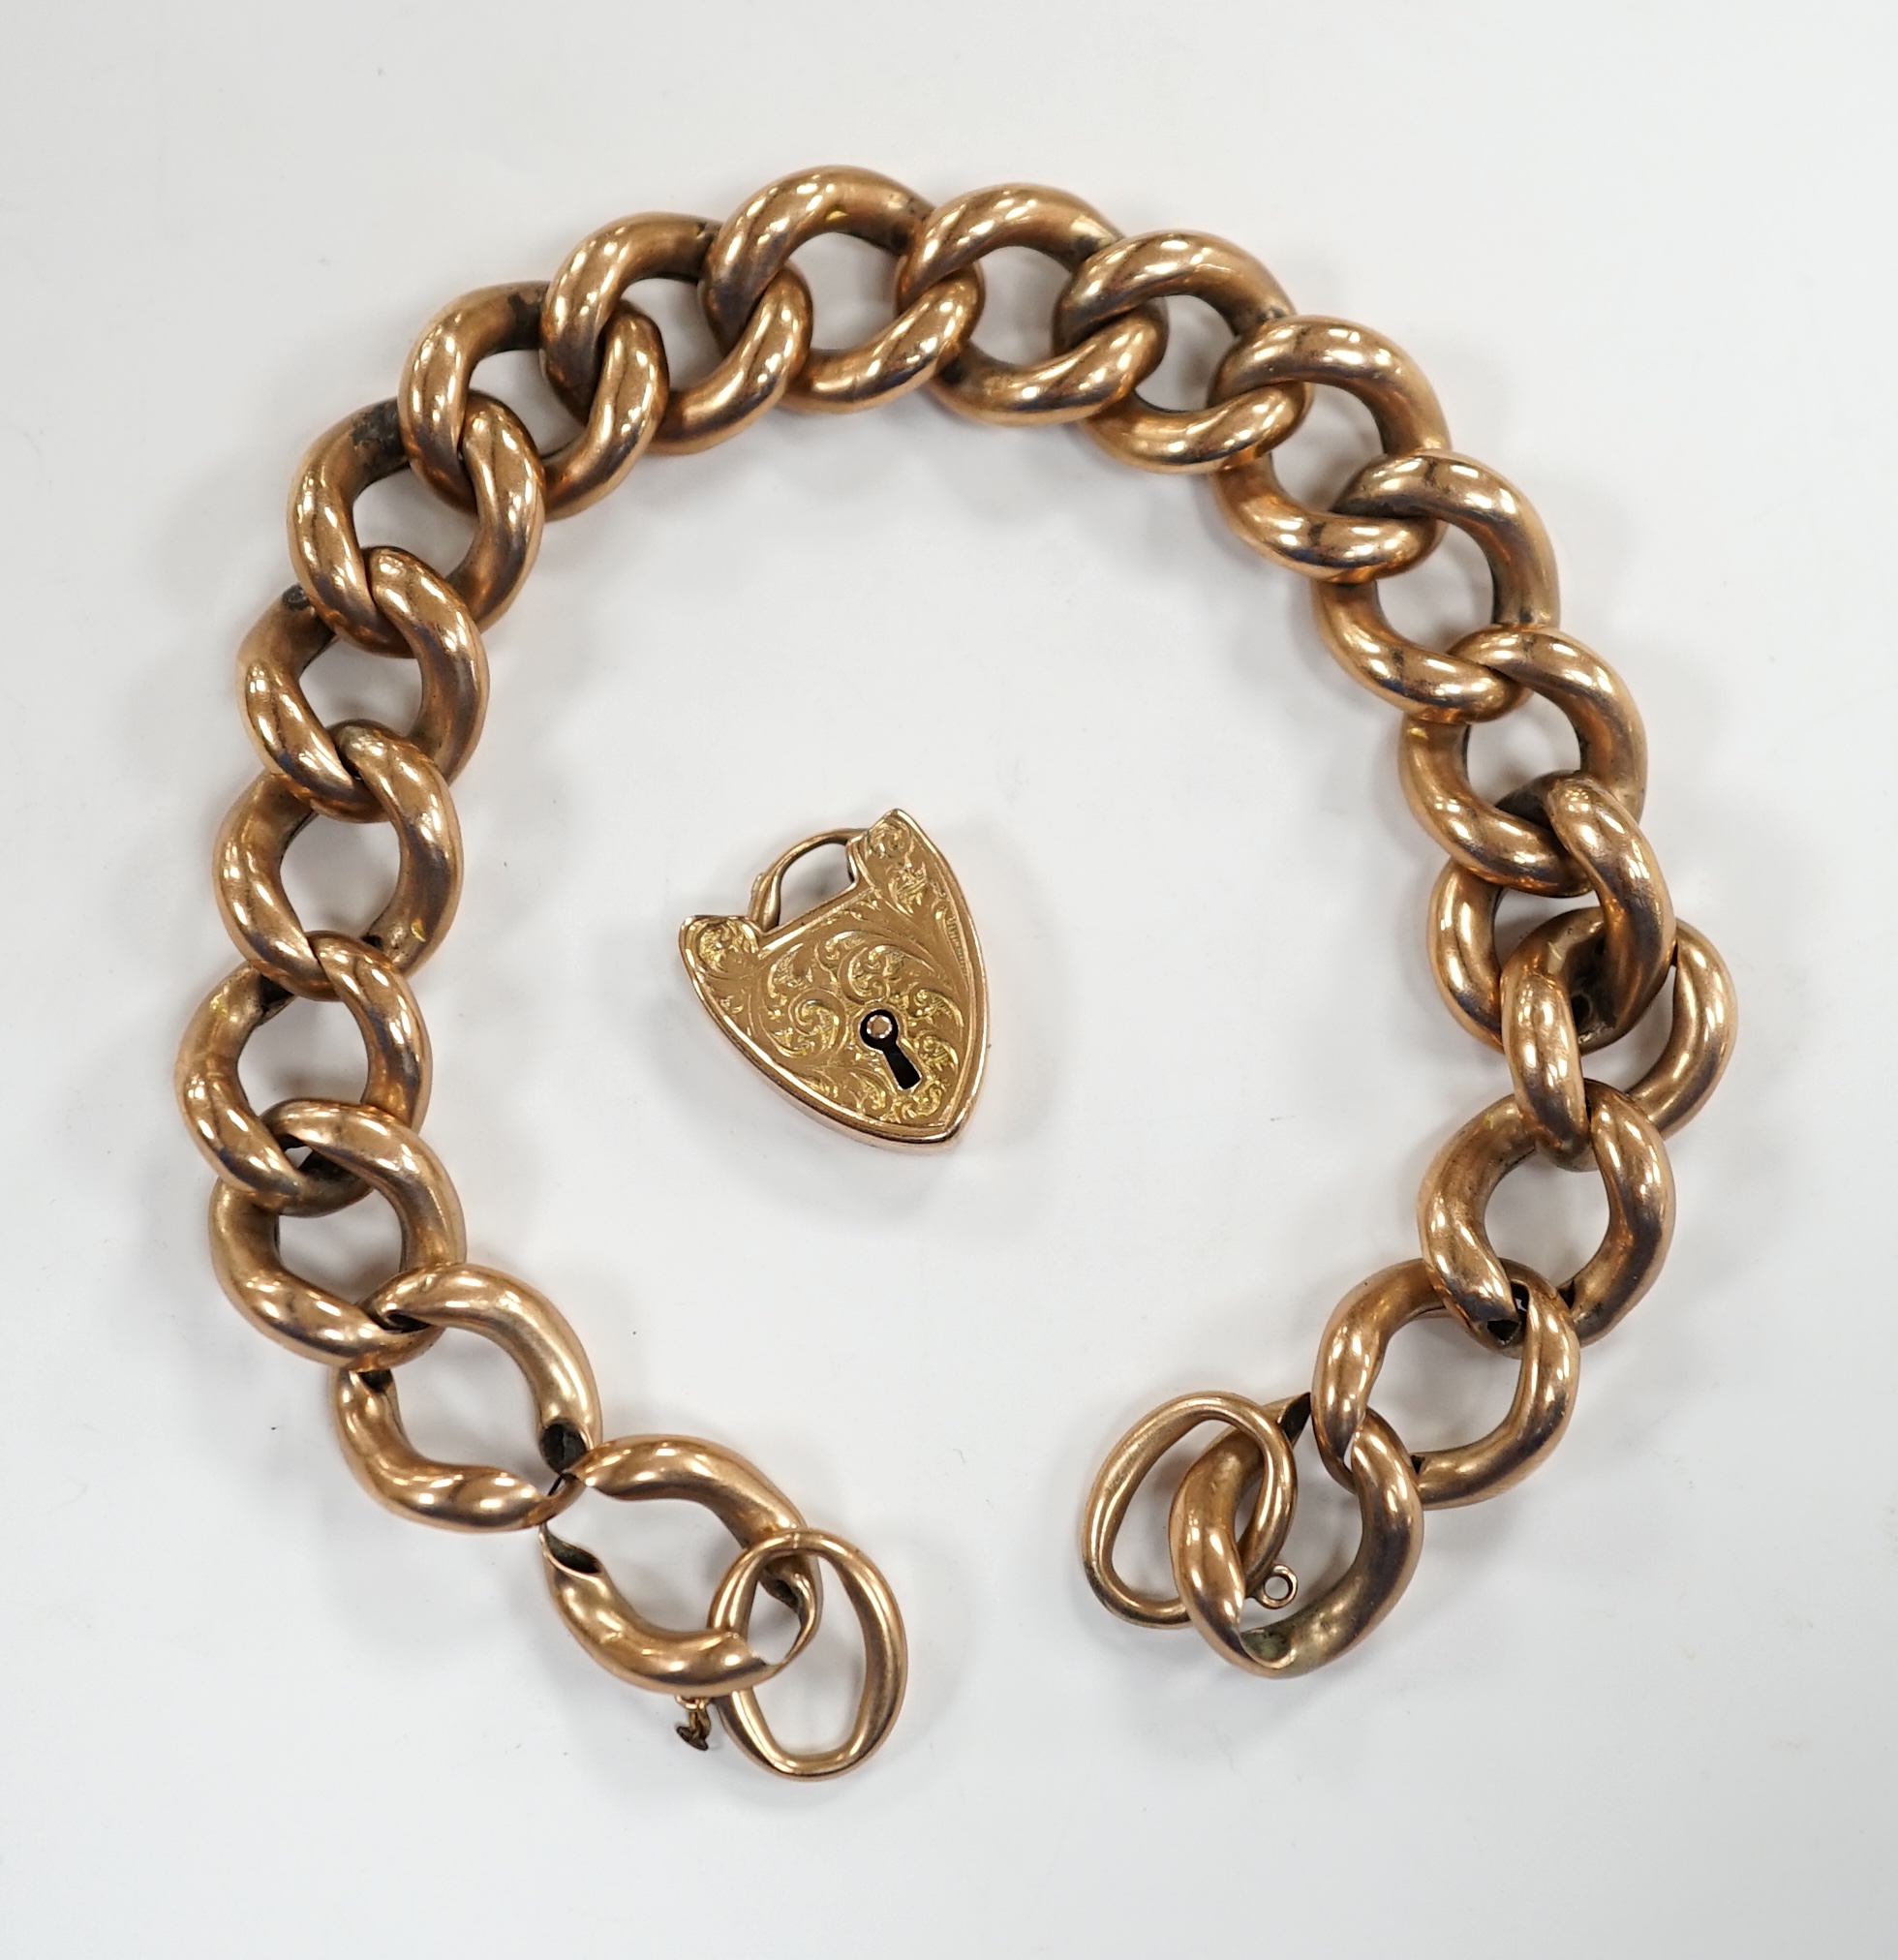 An Edwardian 9ct gold hollow curb link bracelet, with heart shaped padlock clasp(a.f.), 20cm